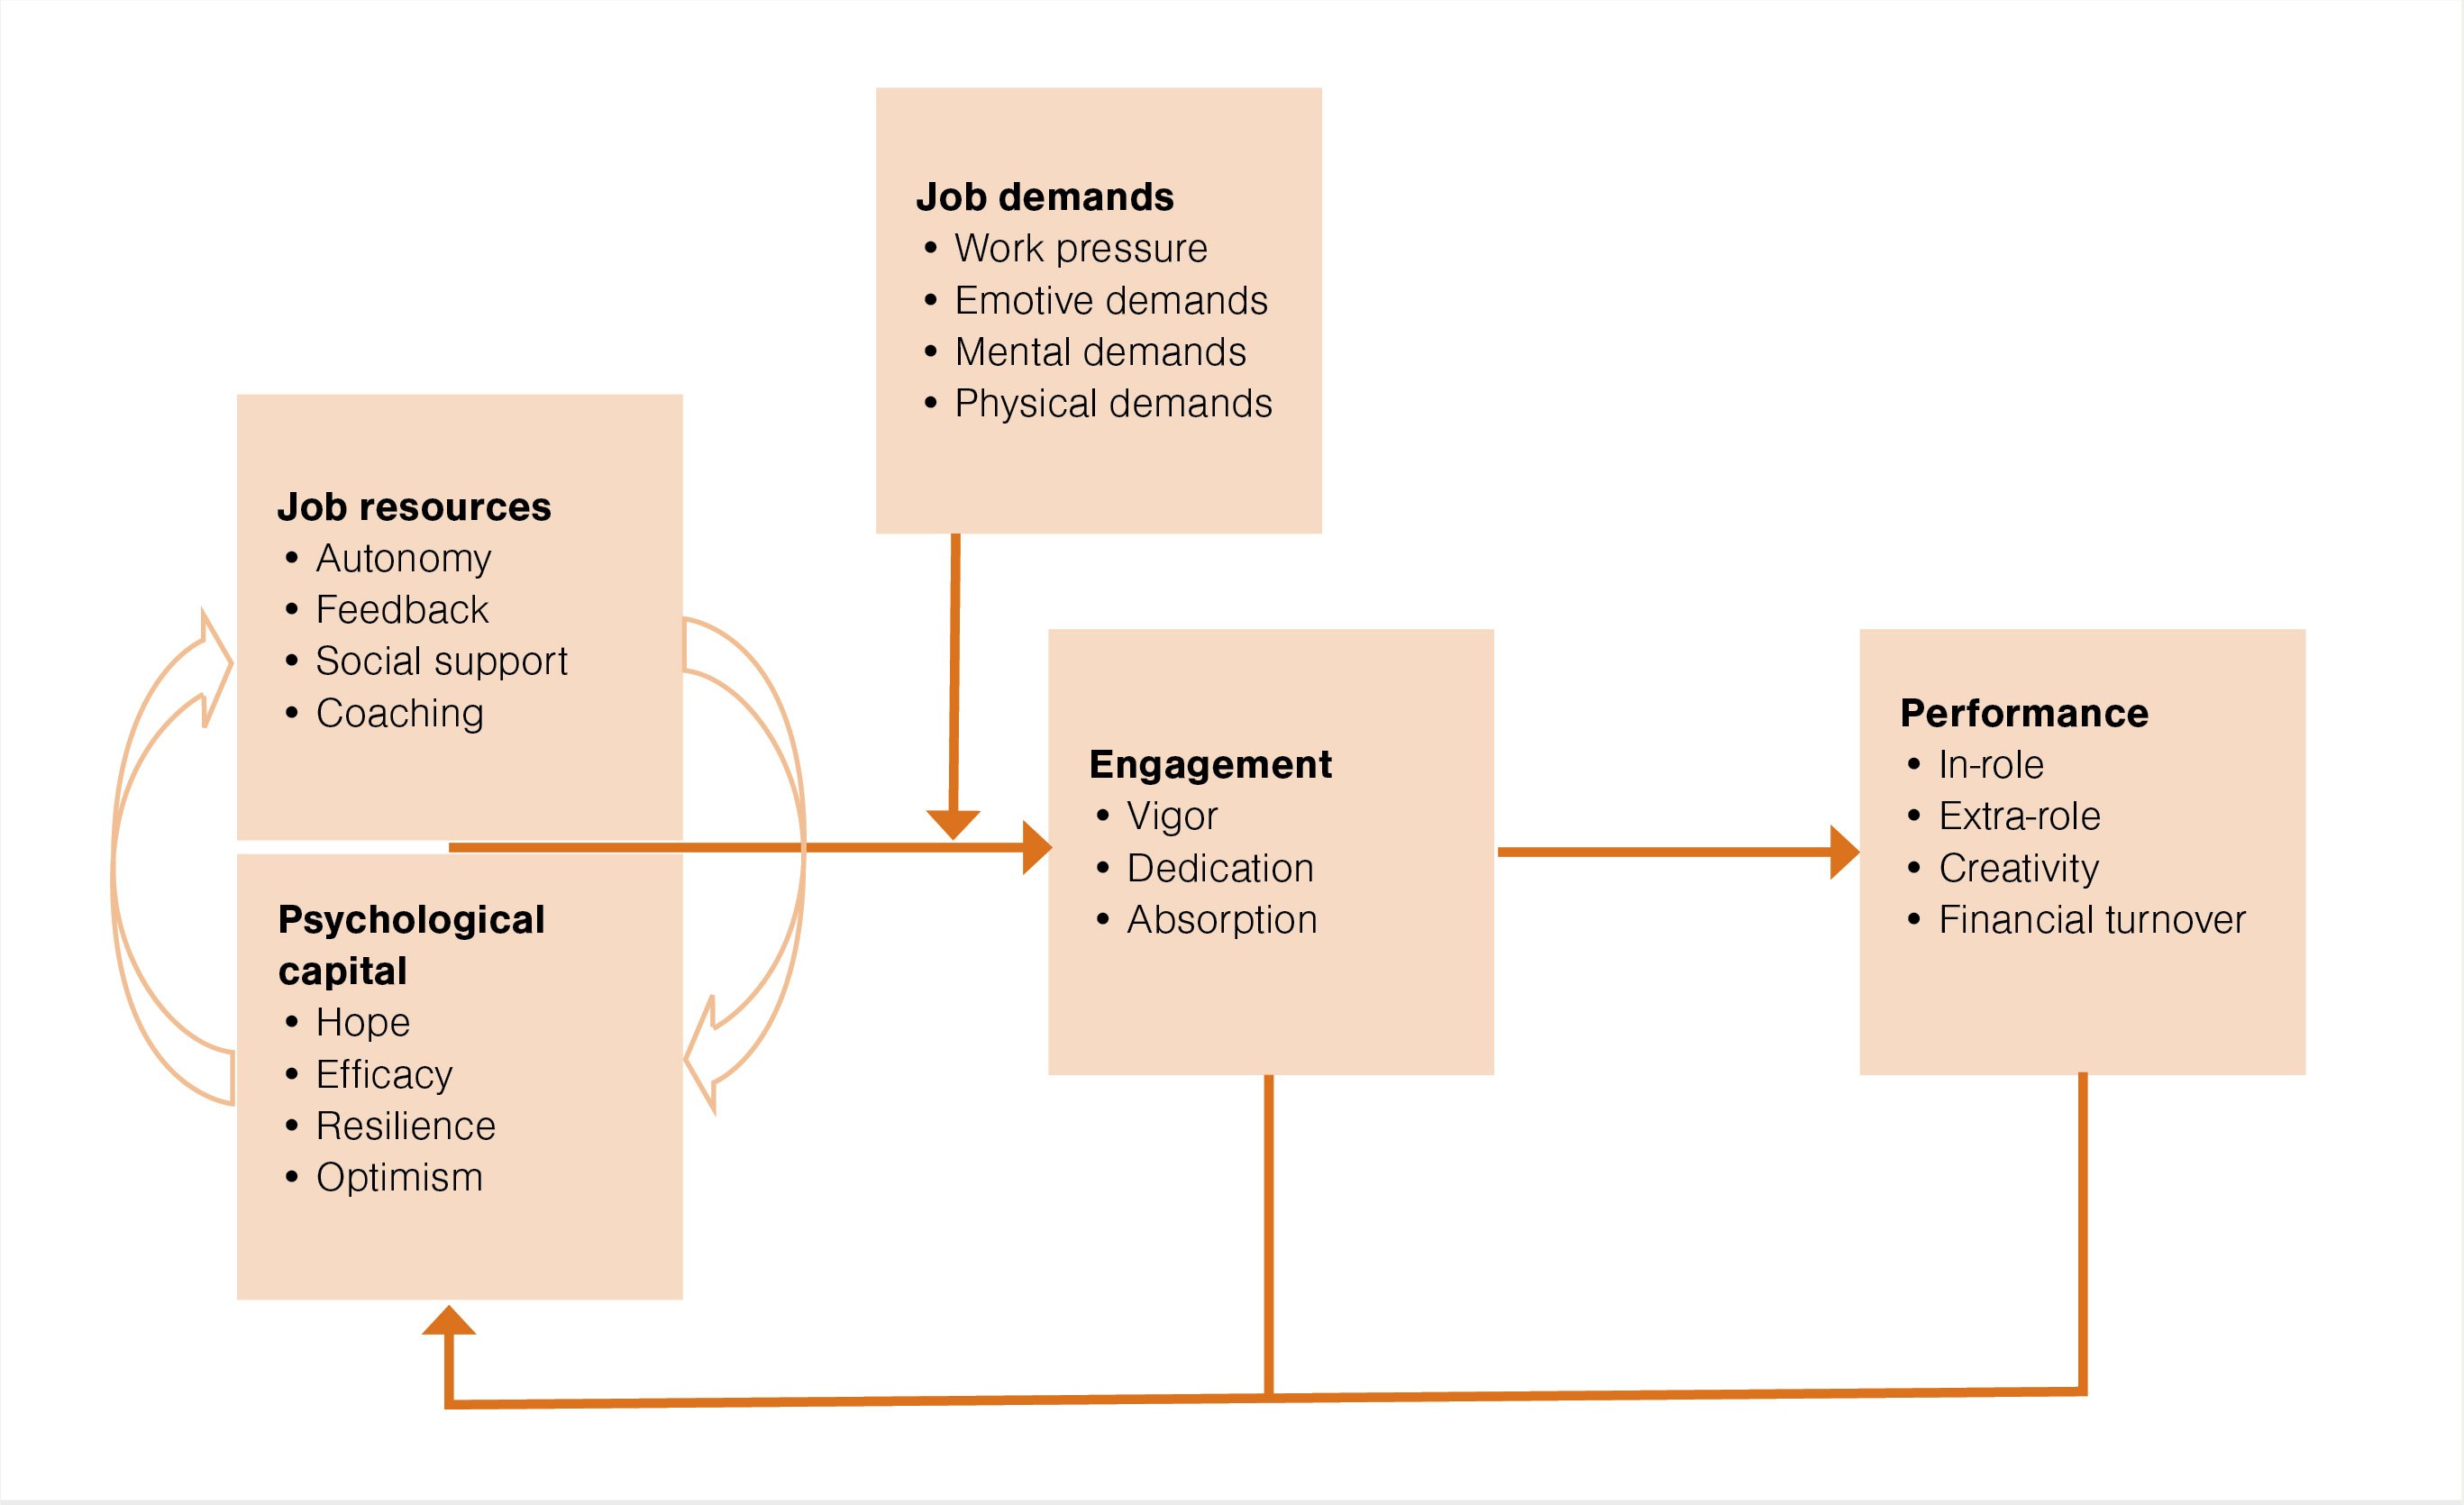 Figure 1. Job Demands-Resources Engagement Model (Image: Adapted from Bakker and Demerouti, 2008)